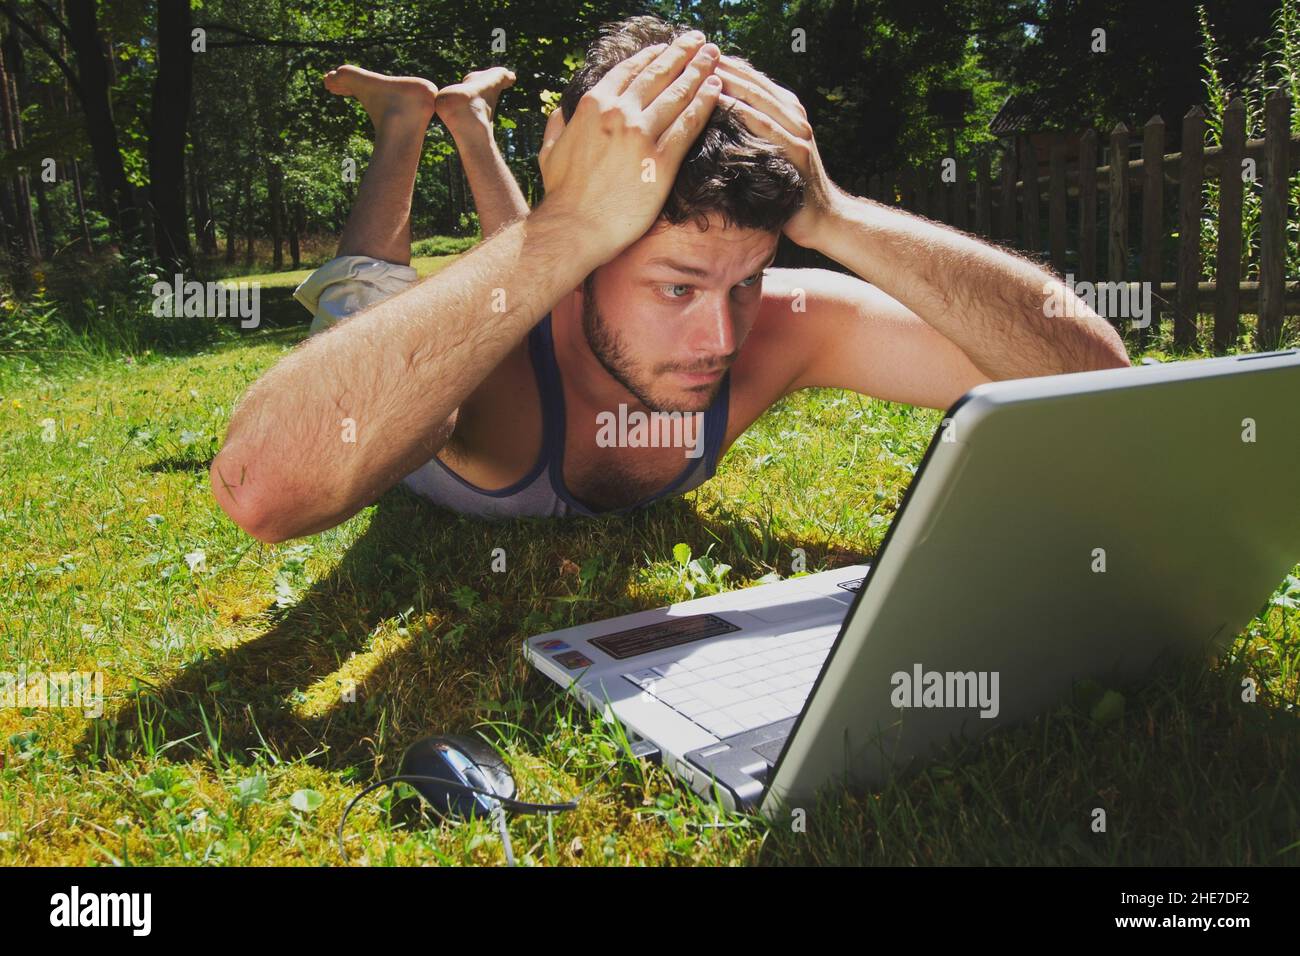 Junger Mann auf dem Rasen mit Laptop | young man lying on lawn and working with a laptop Stock Photo